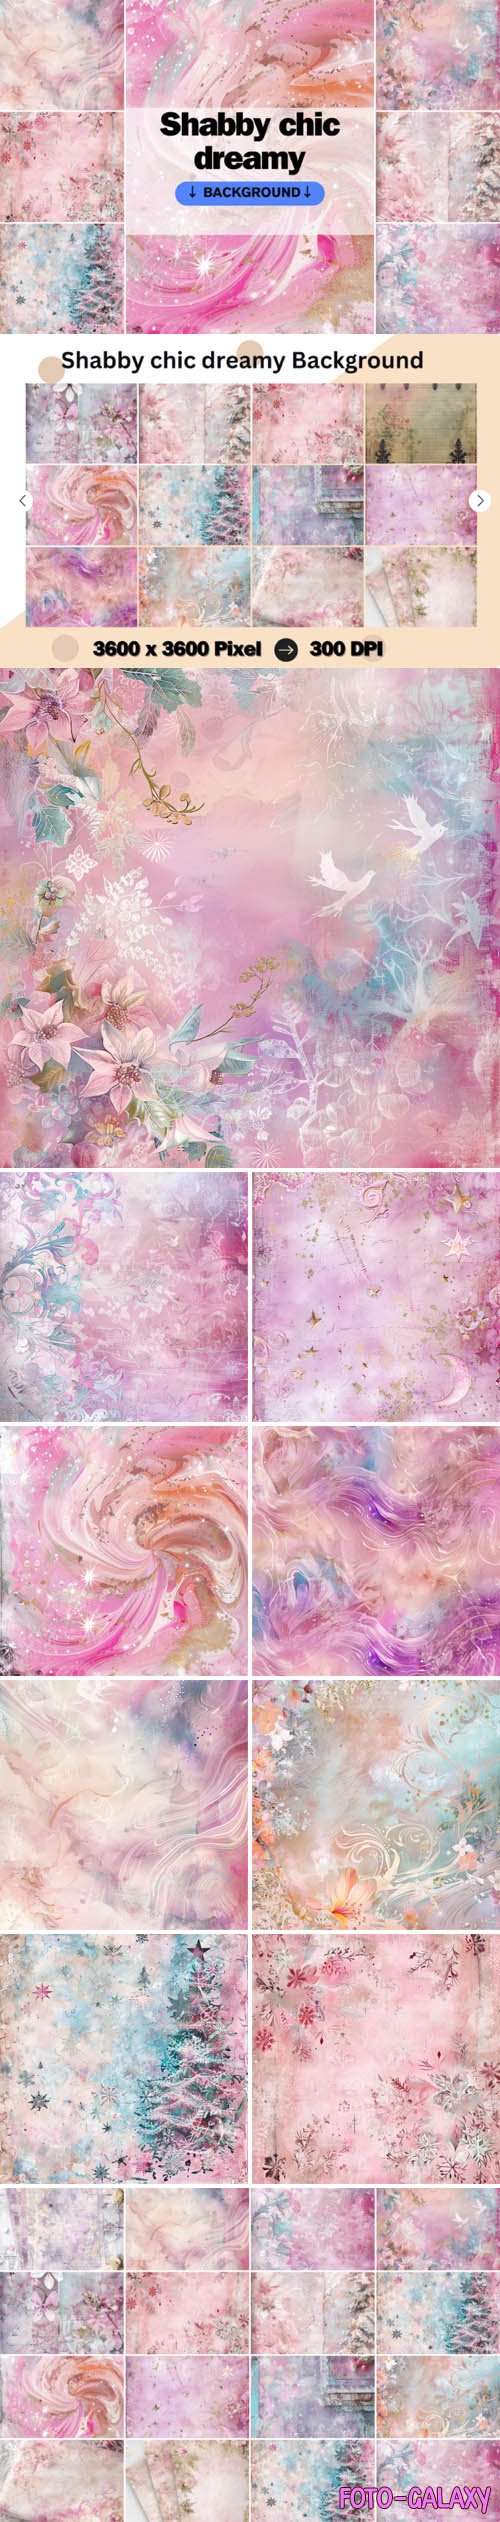 9 Dreamy Backgrounds